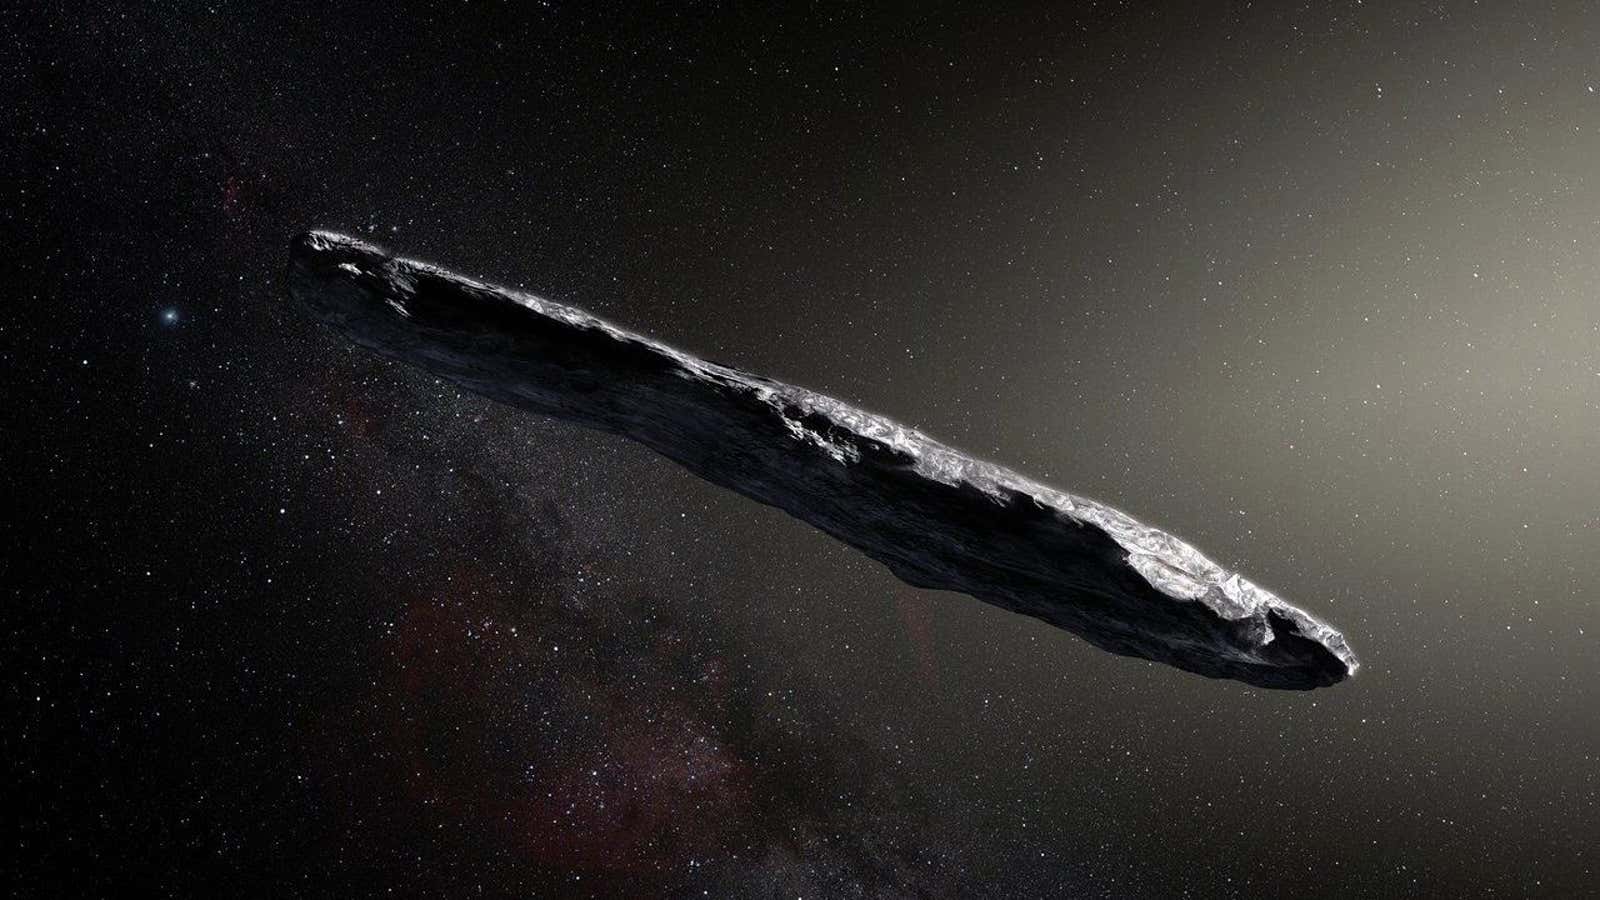 An artist’s rendition of the first interstellar asteroid discovered in our solar system.